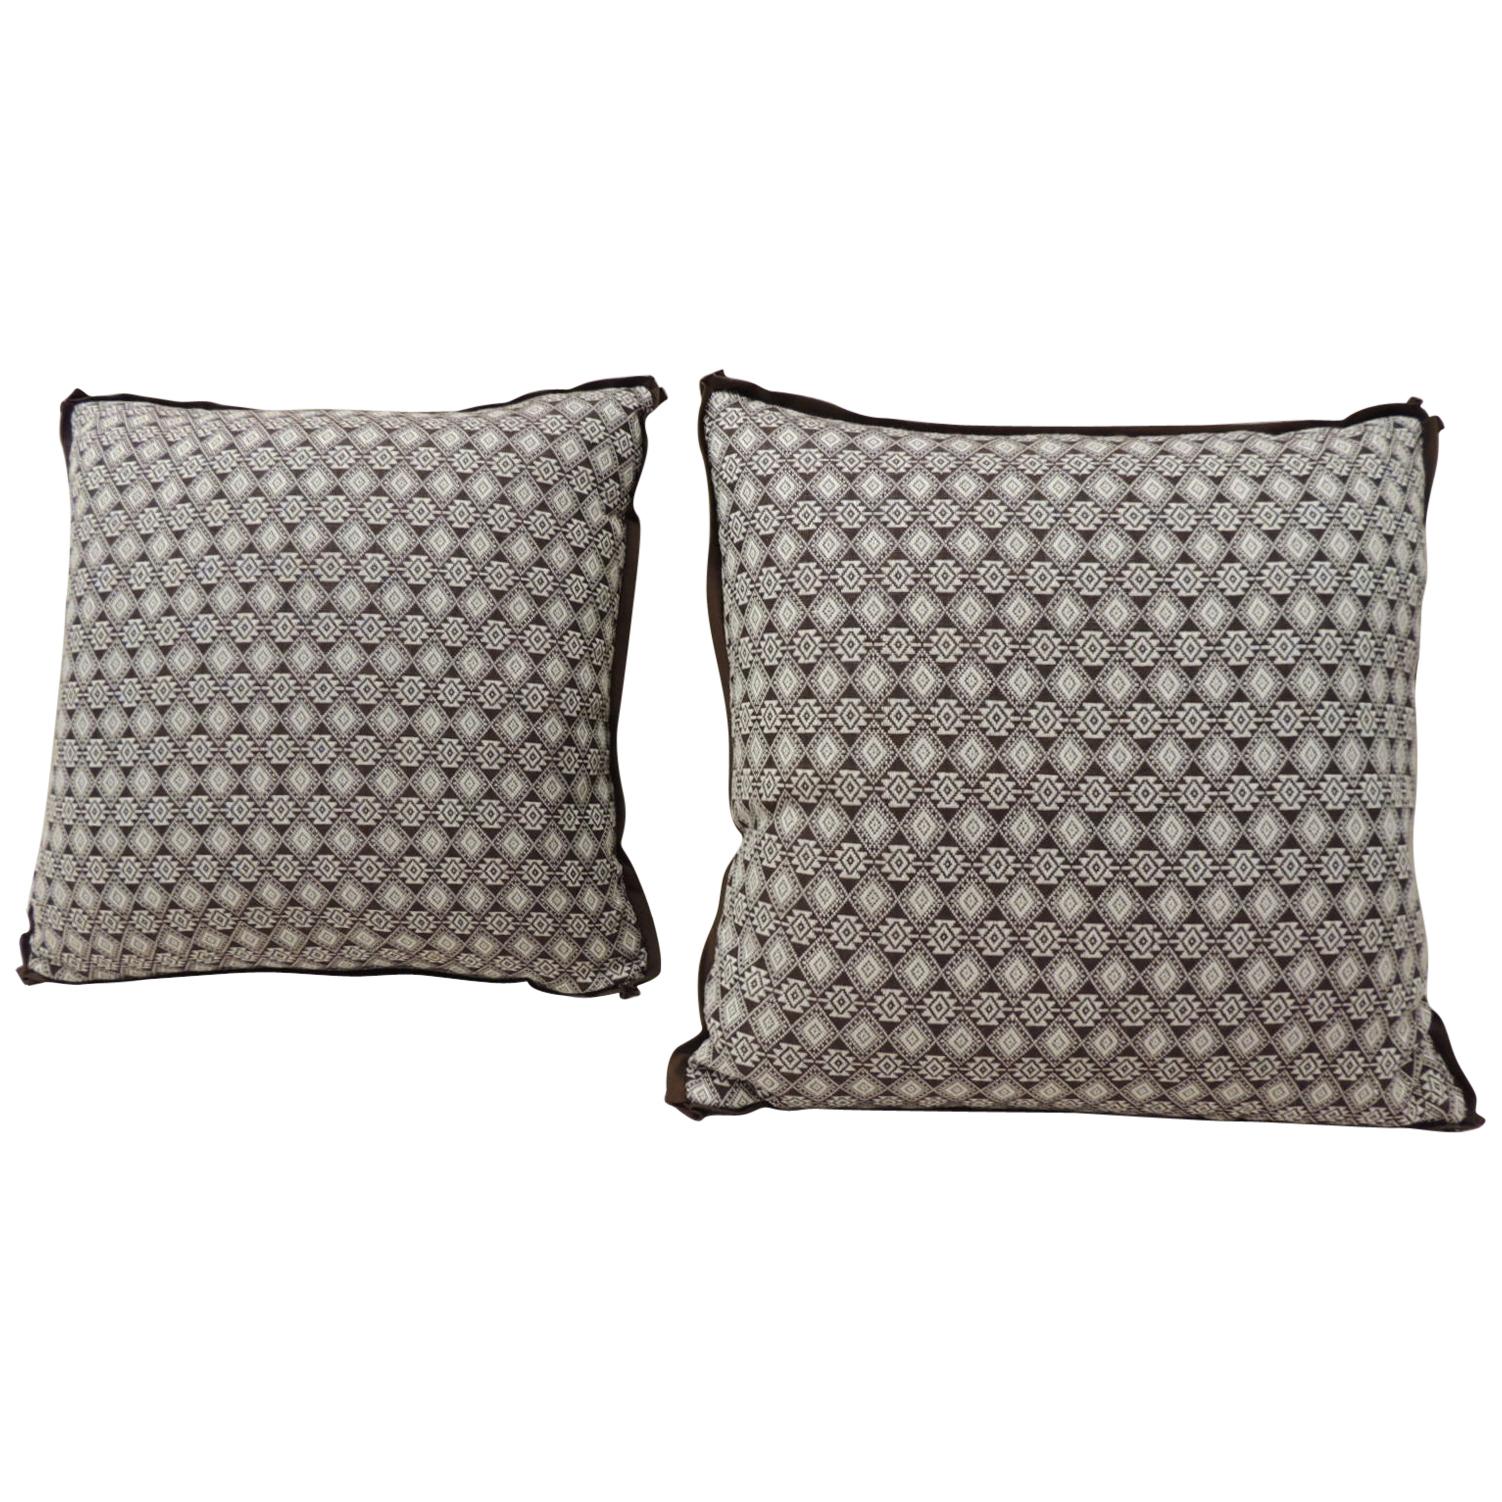 Pair of Brown and White Woven Swedish Decorative Pillows